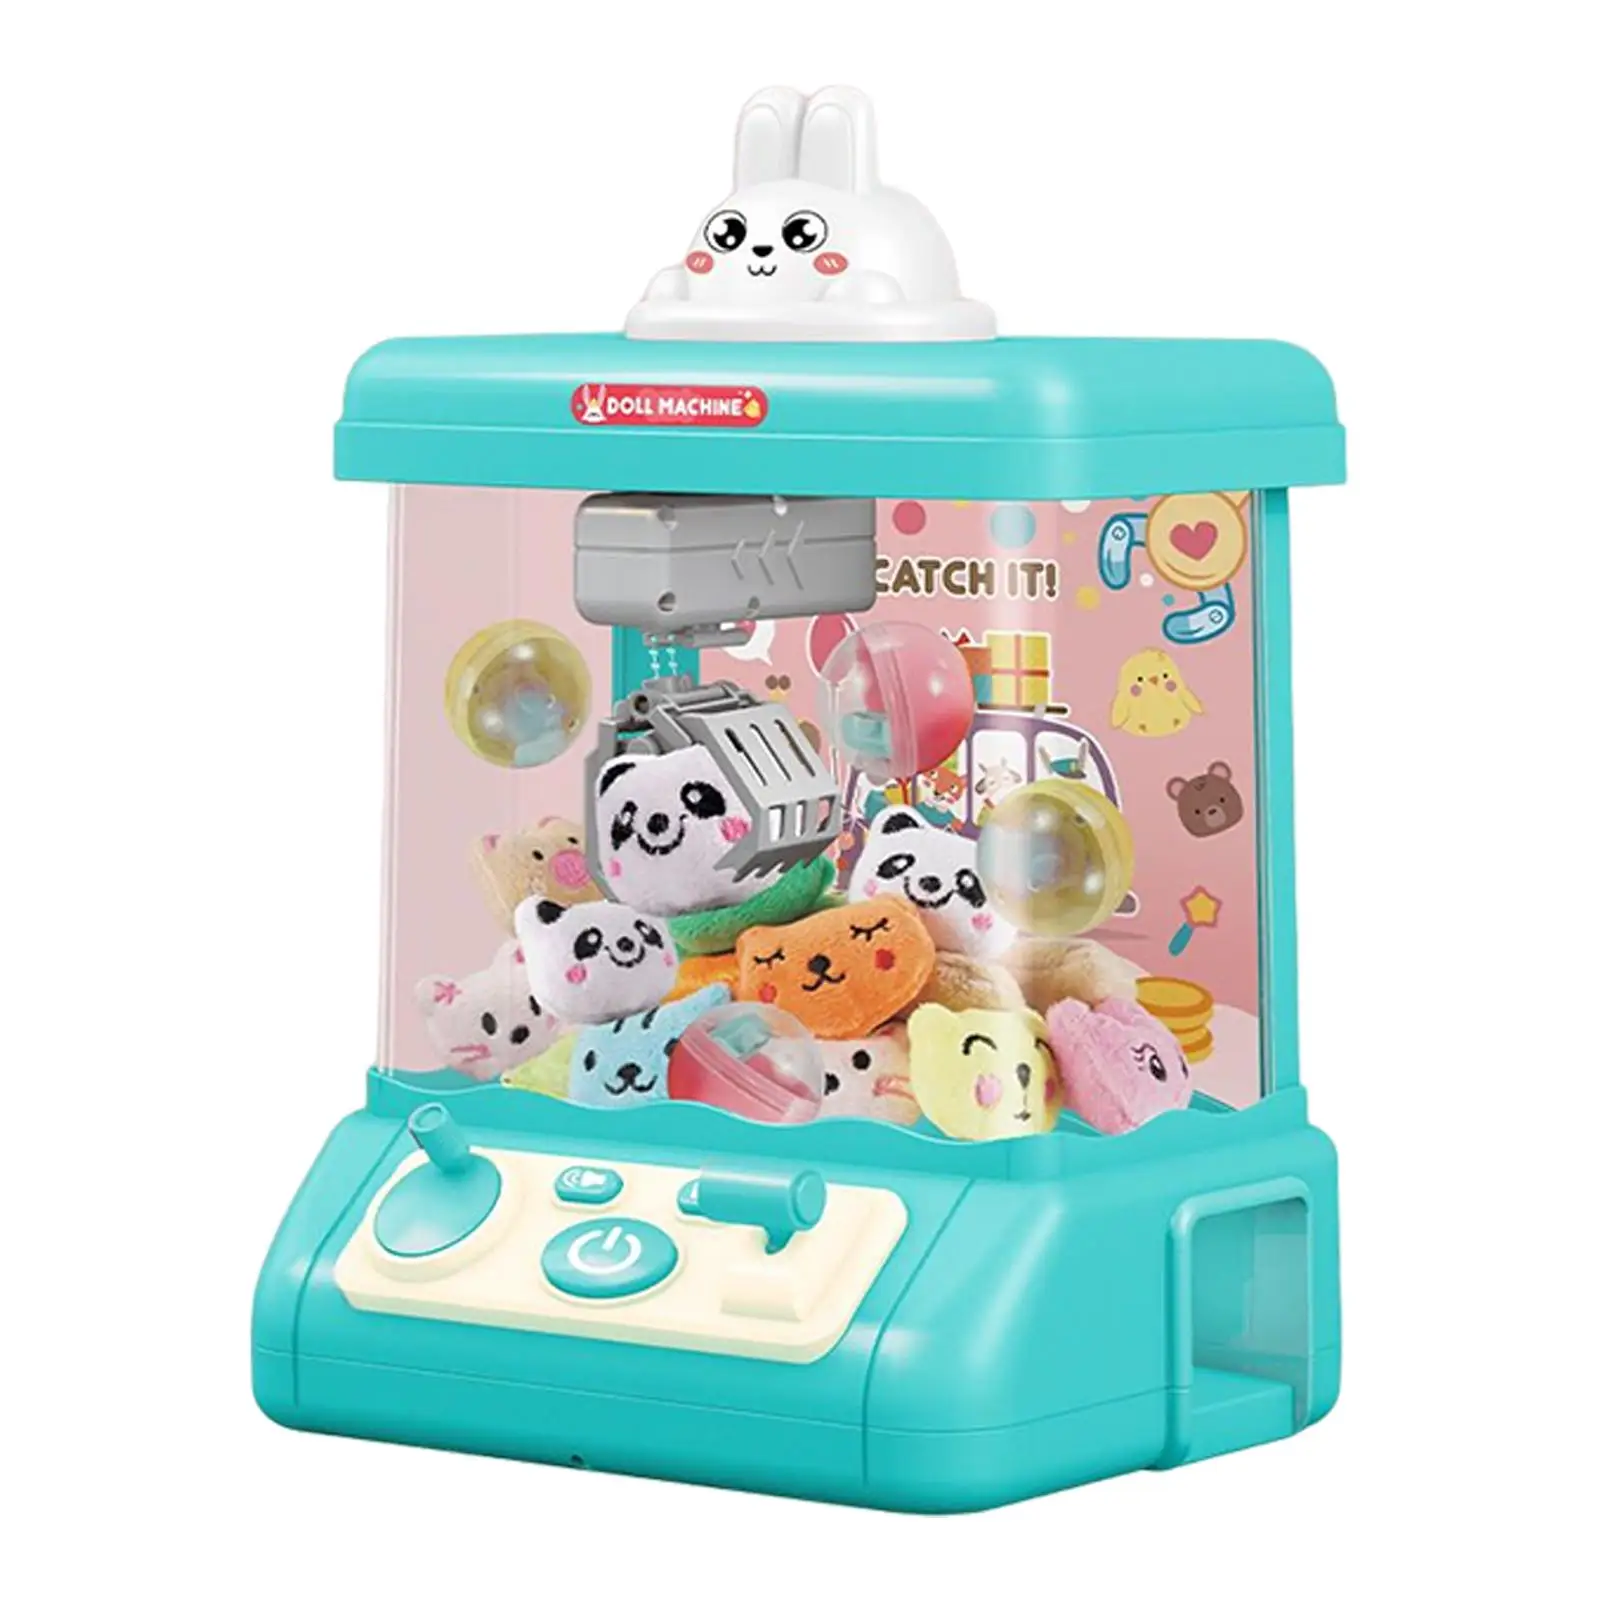 Claw Machine with Lights and Sound Catching Doll Machine for Birthday Gifts